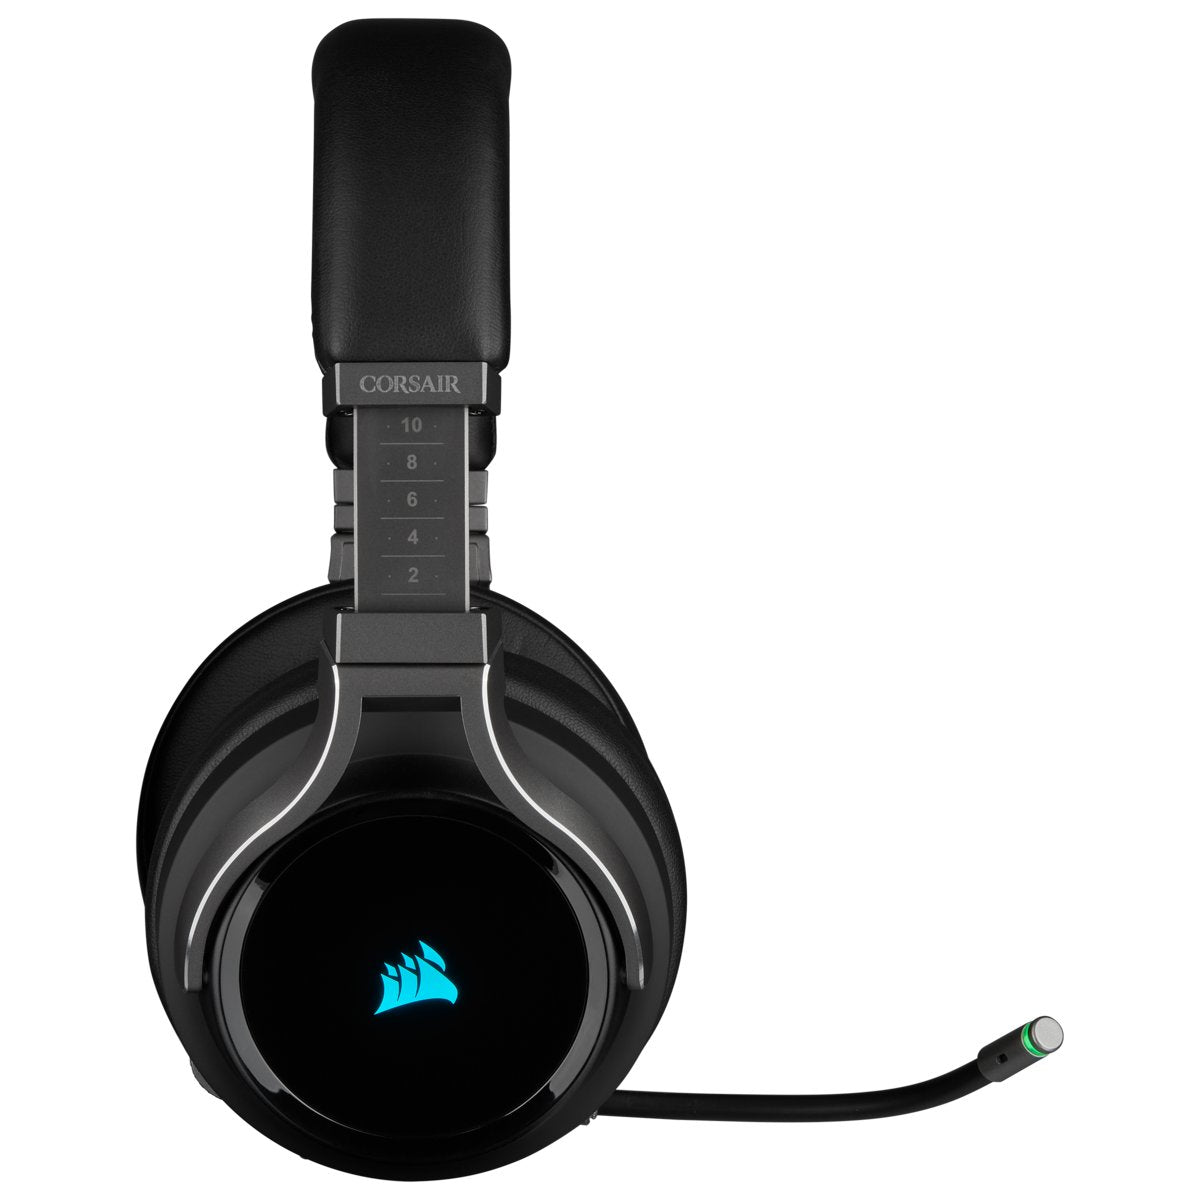 CORSAIR Virtuoso iCUE RGB Wireless High Fidelity Gaming Headset Headphones w/ 7.1 Surround Sound, Detachable Broadcast-Grade Omnidirectional Microphone, Slipstream / USB & 3.5mm AUX Wired for PC Laptop and Consoles (Carbon) | CA-9011185-AP